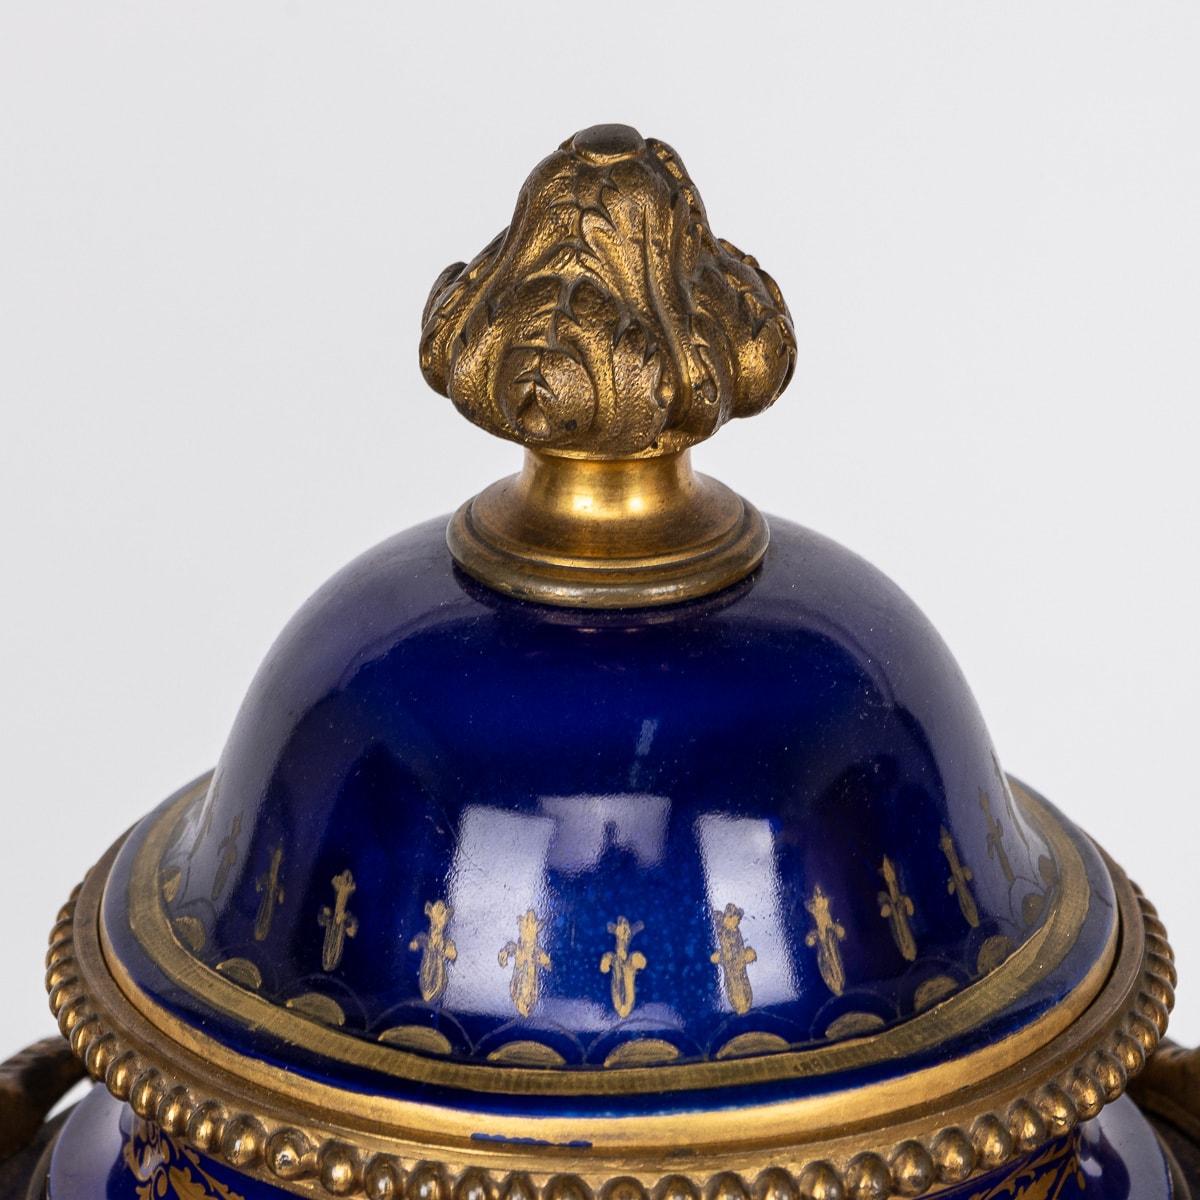 Porcelain Antique 19th Century Sèvres Ormolu Mounted Vases With Covers c.1870 For Sale